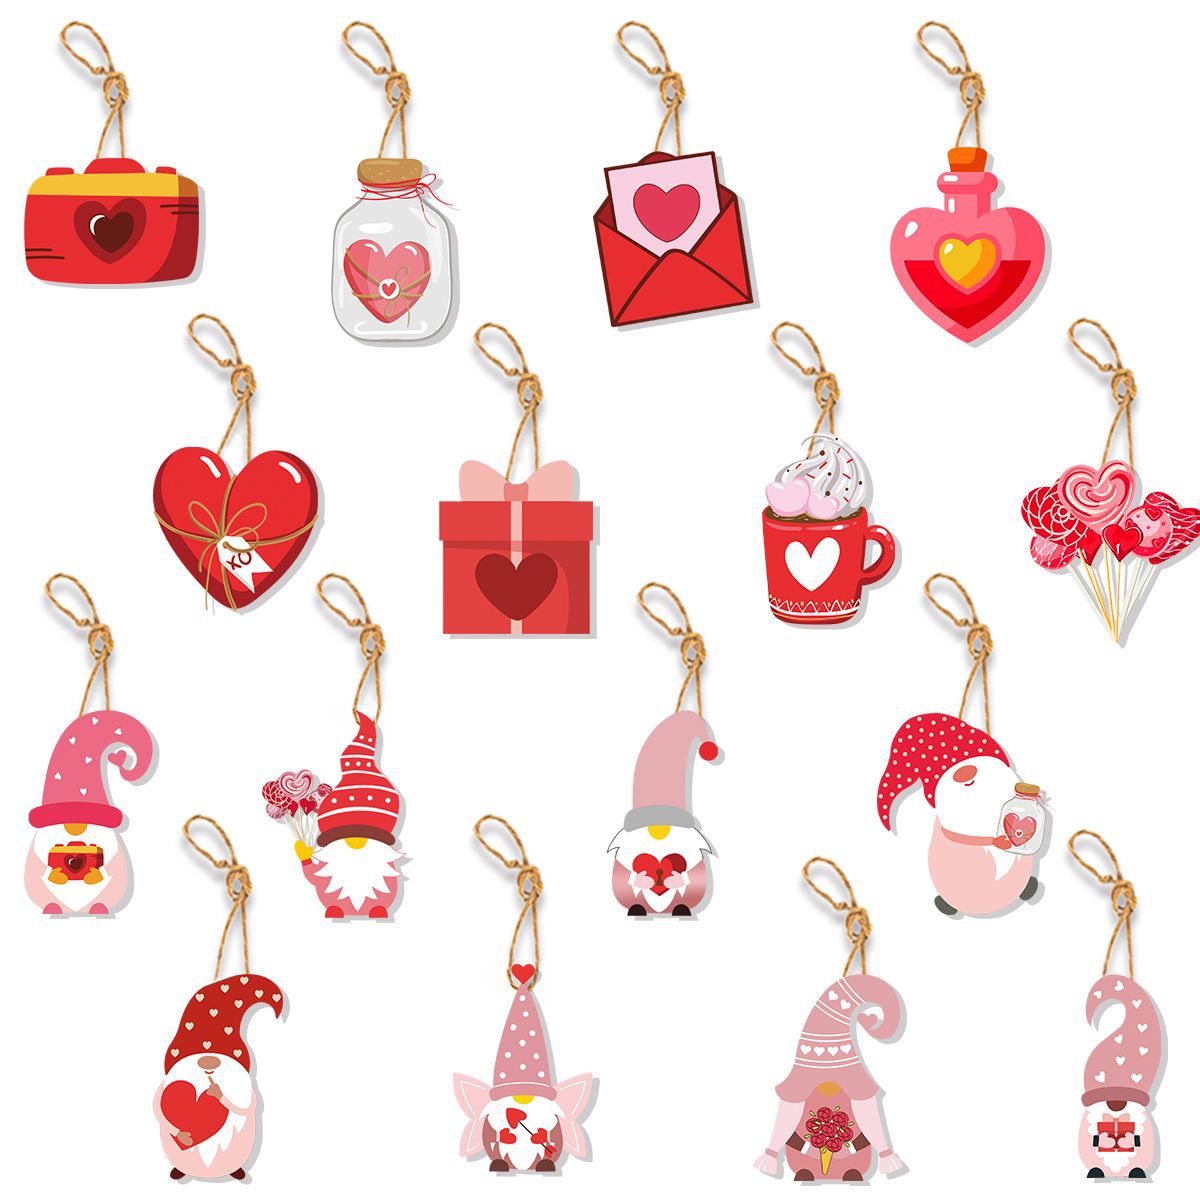 Valentine's Day decor, Romantic home accents, Heart-themed decorations, Cupid-inspired ornaments, Love-themed party supplies, Red and pink decor, Valentine's Day table settings, Romantic ambiance accessories, Heart-shaped embellishments, Valentine's Day home embellishments